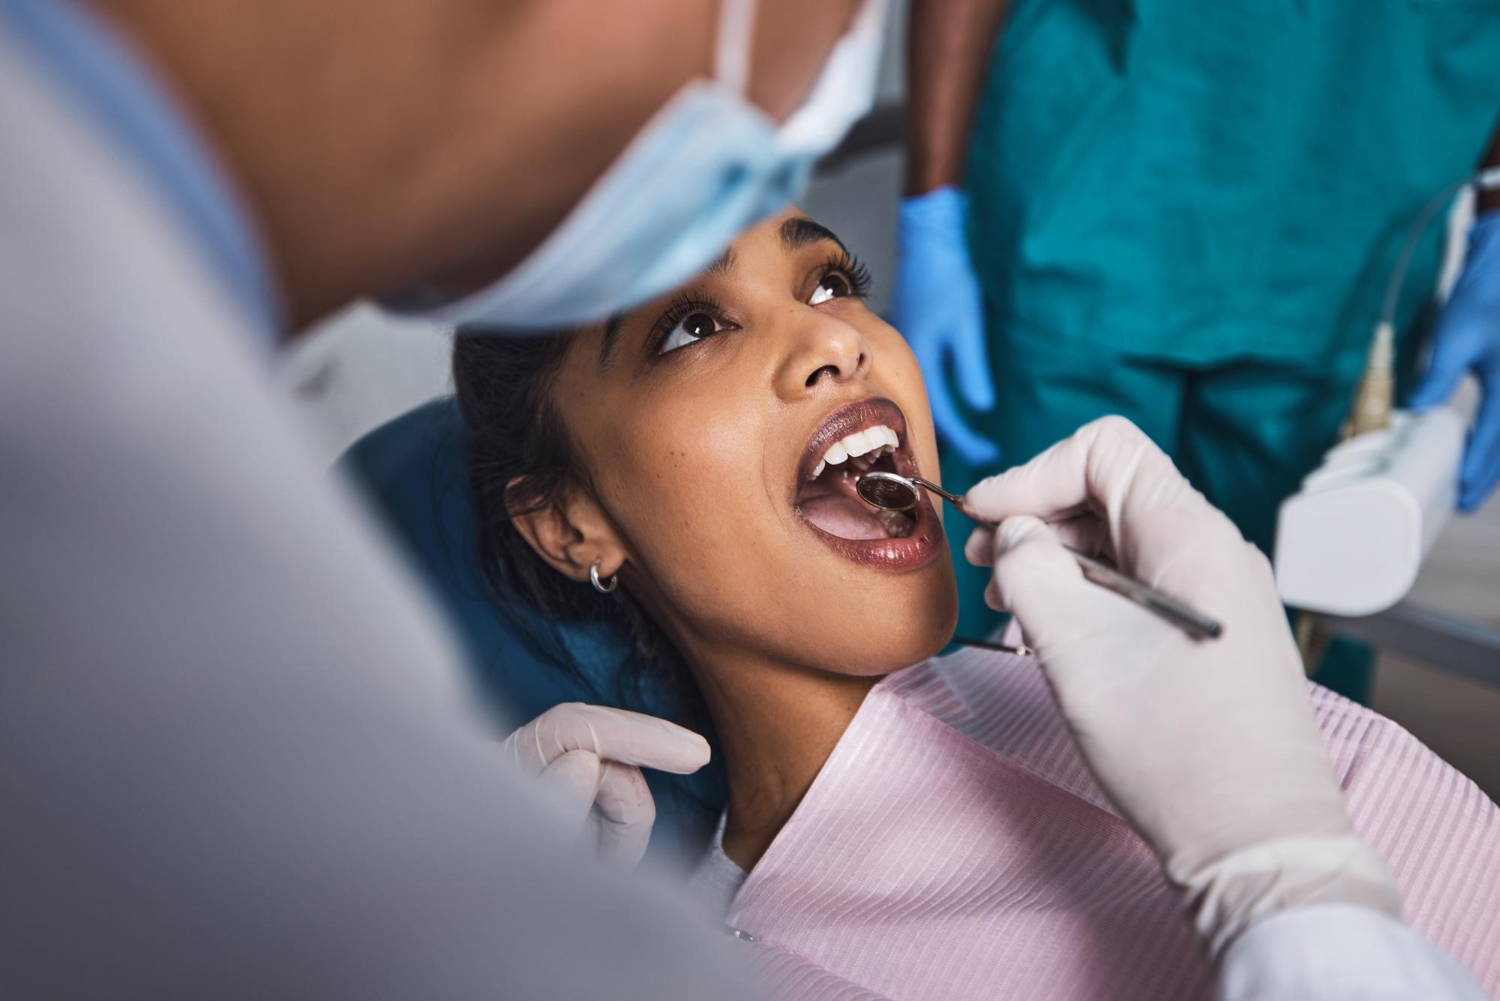 young woman having dental work done her teeth